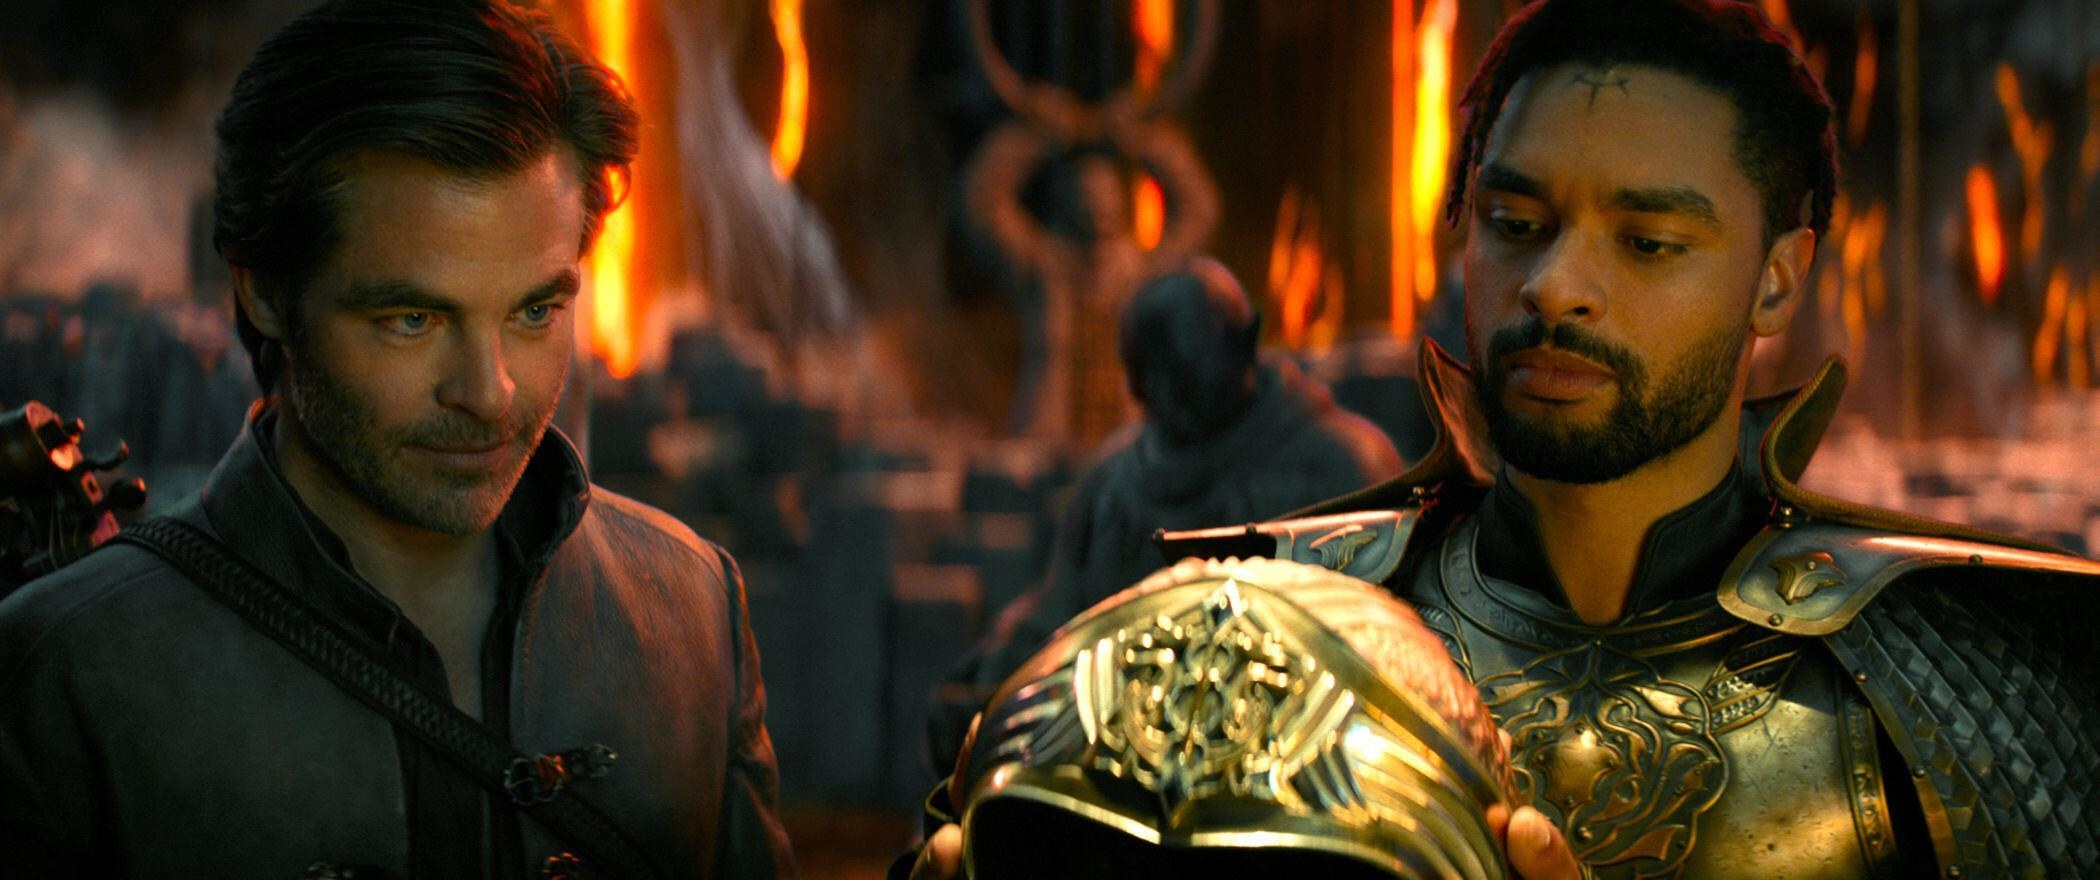 Chris Pine and Regé-Jean Page observe a mythical gold helmet